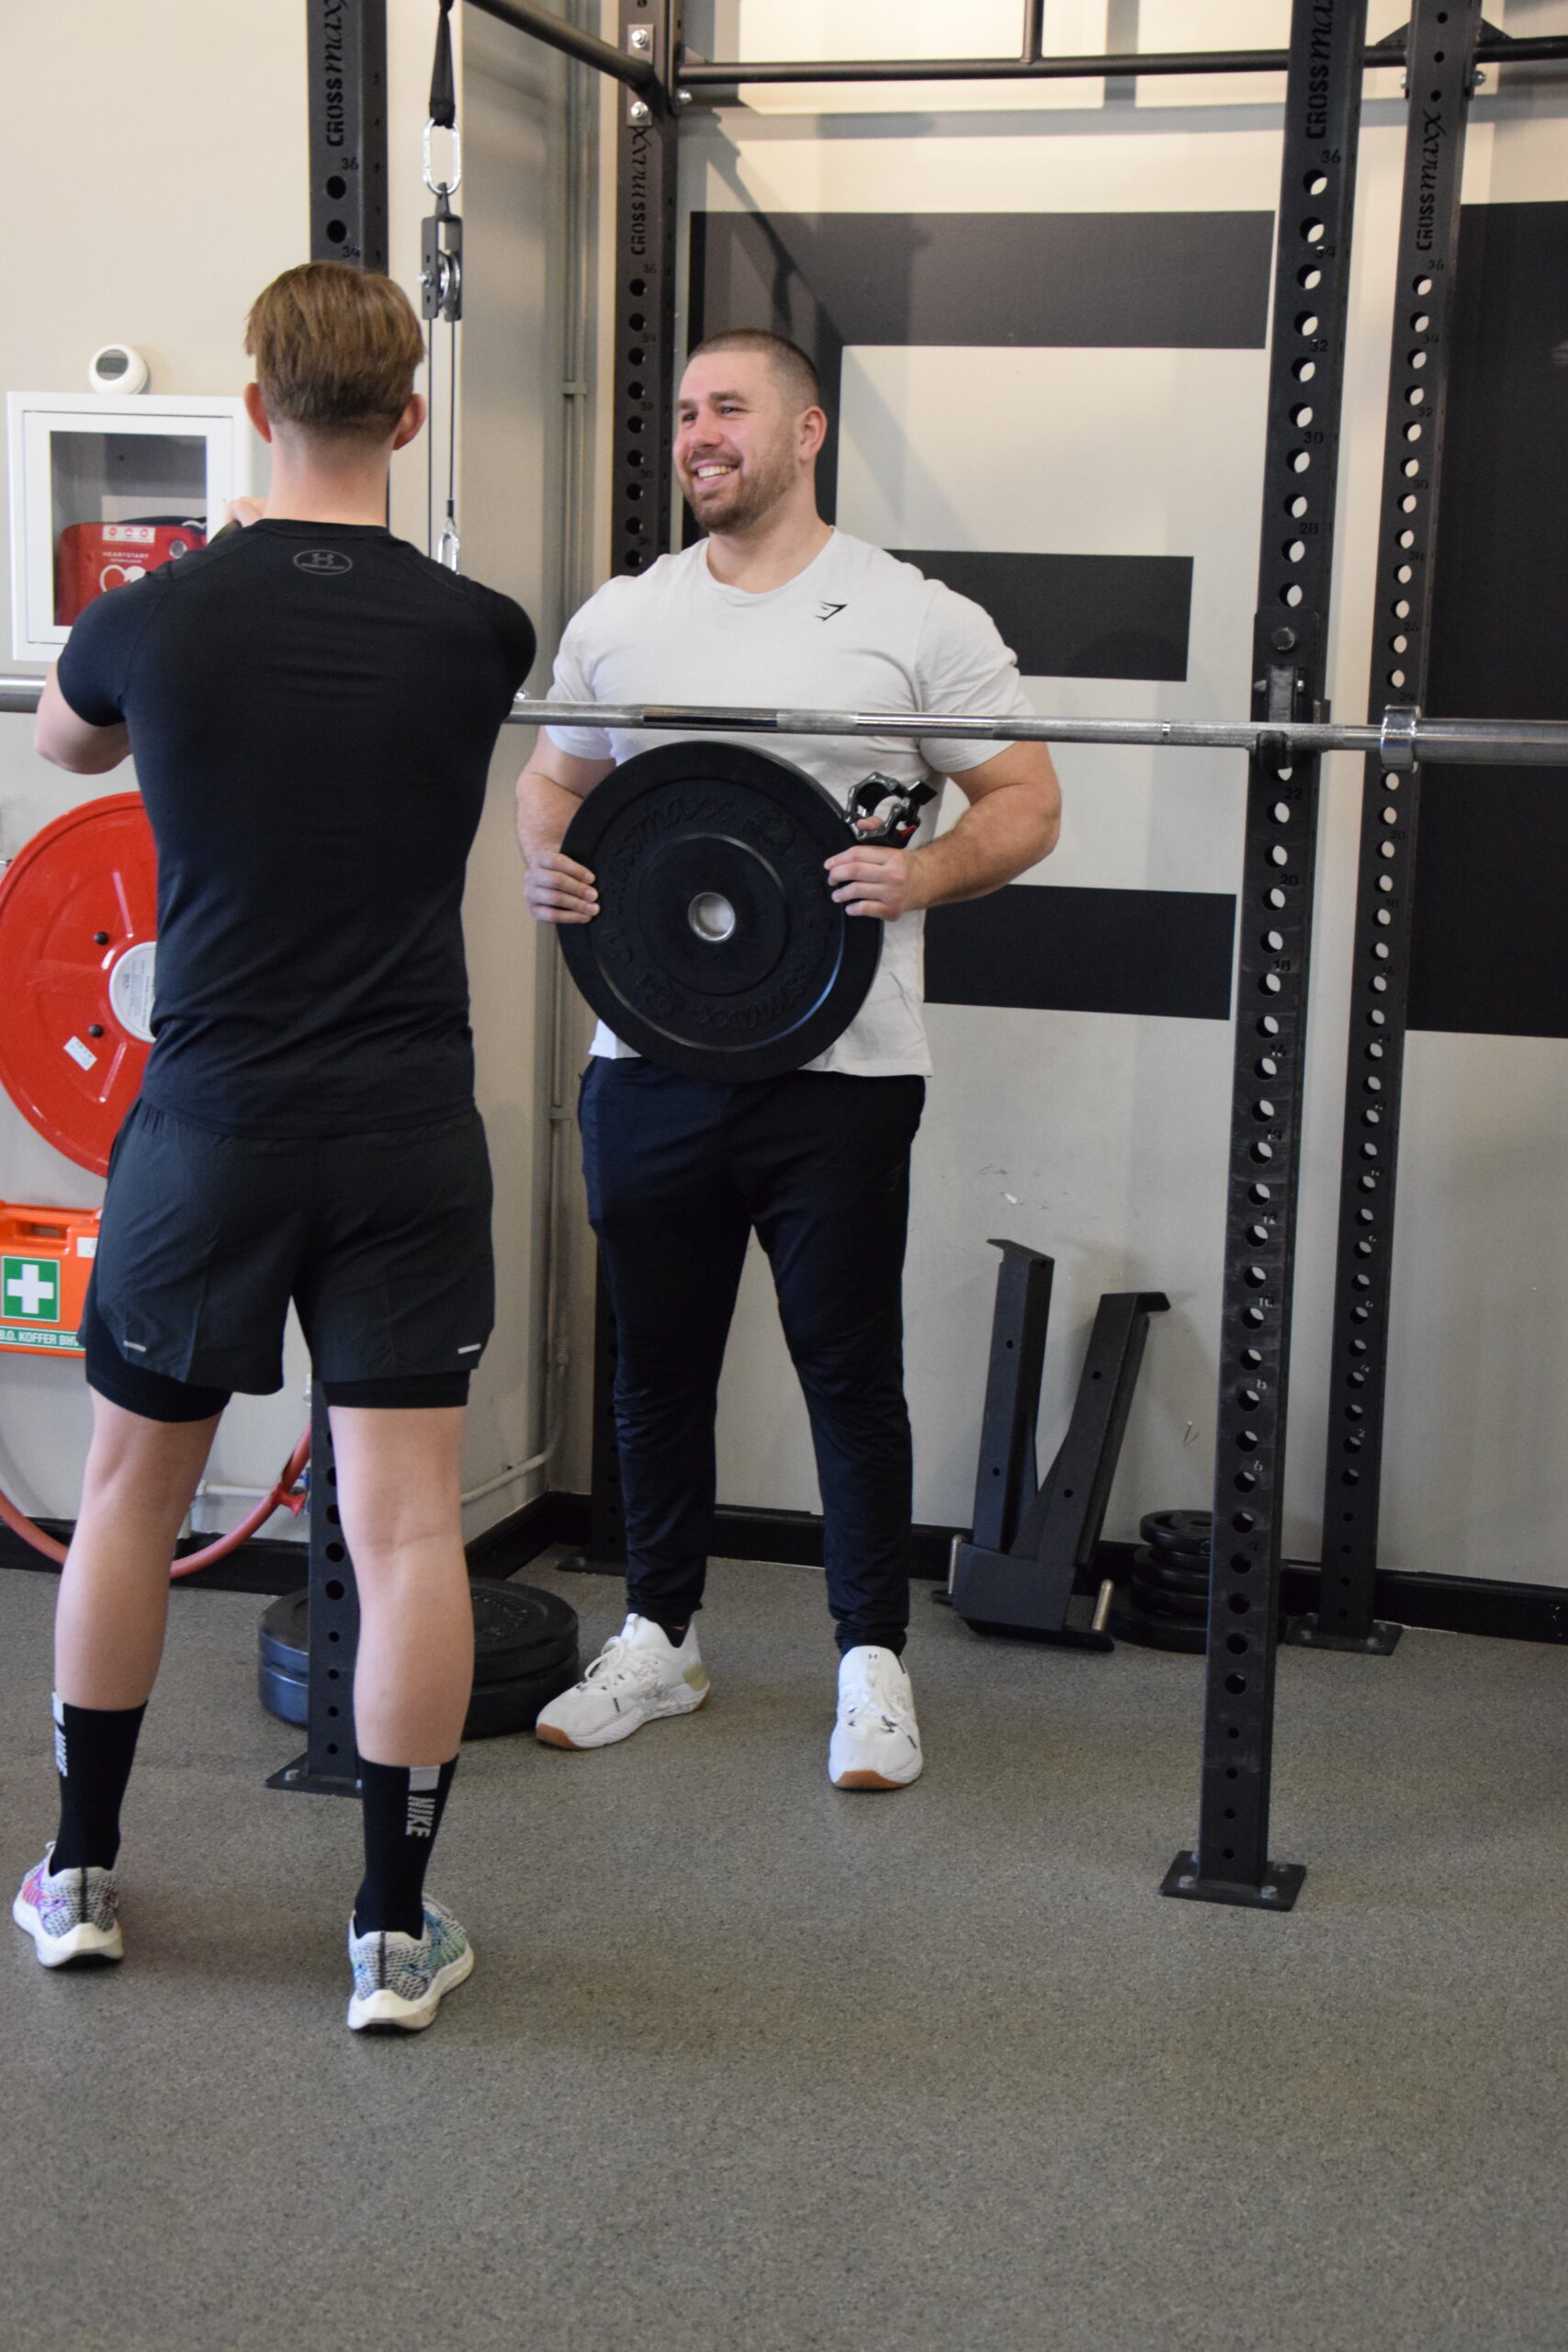 Personal trainer carries a weight to put on a barbell/bar for his client.